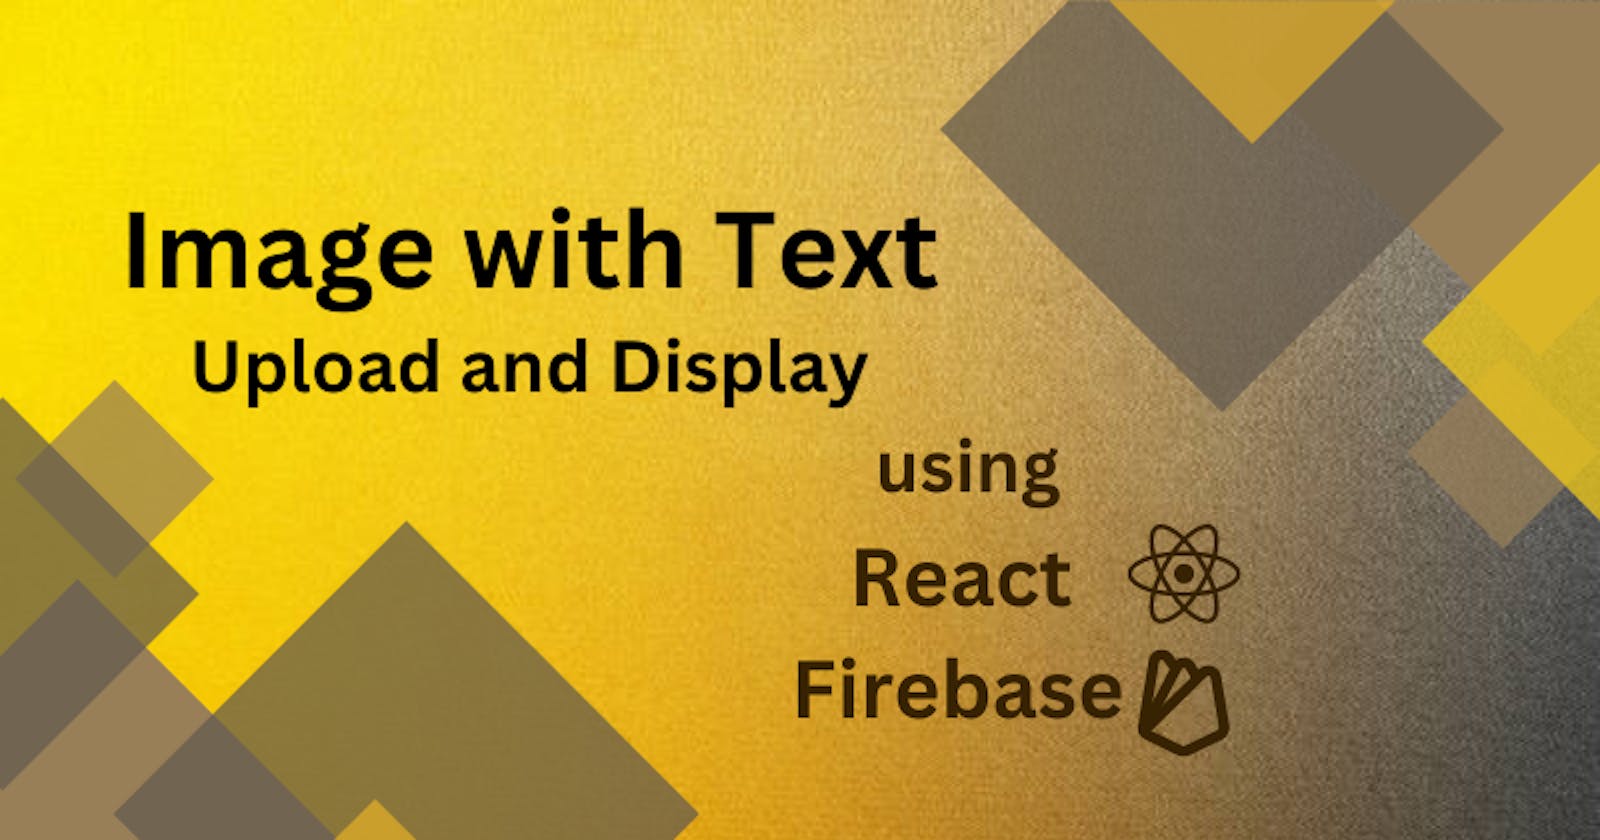 Text with Image using Firebase